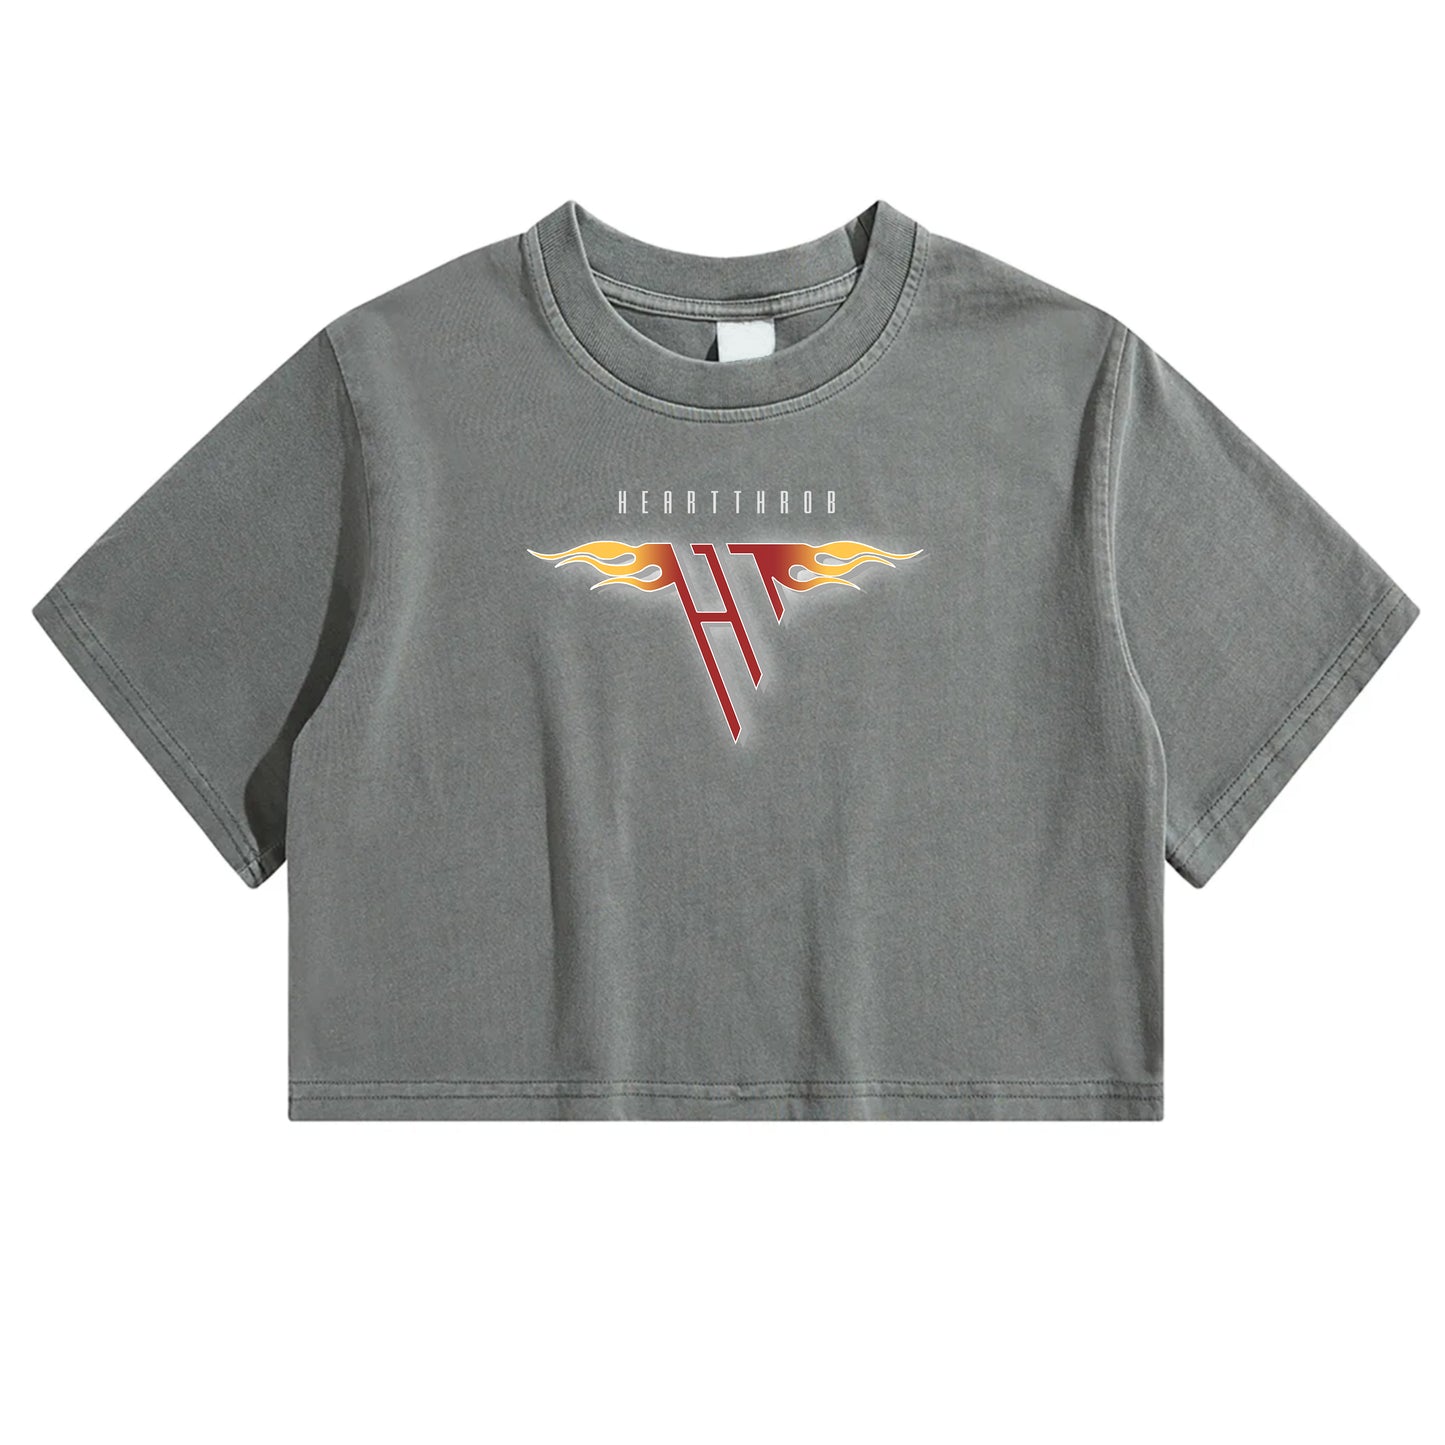 "Runnin' with the Devil" Women's Vintage Washed Crop Top